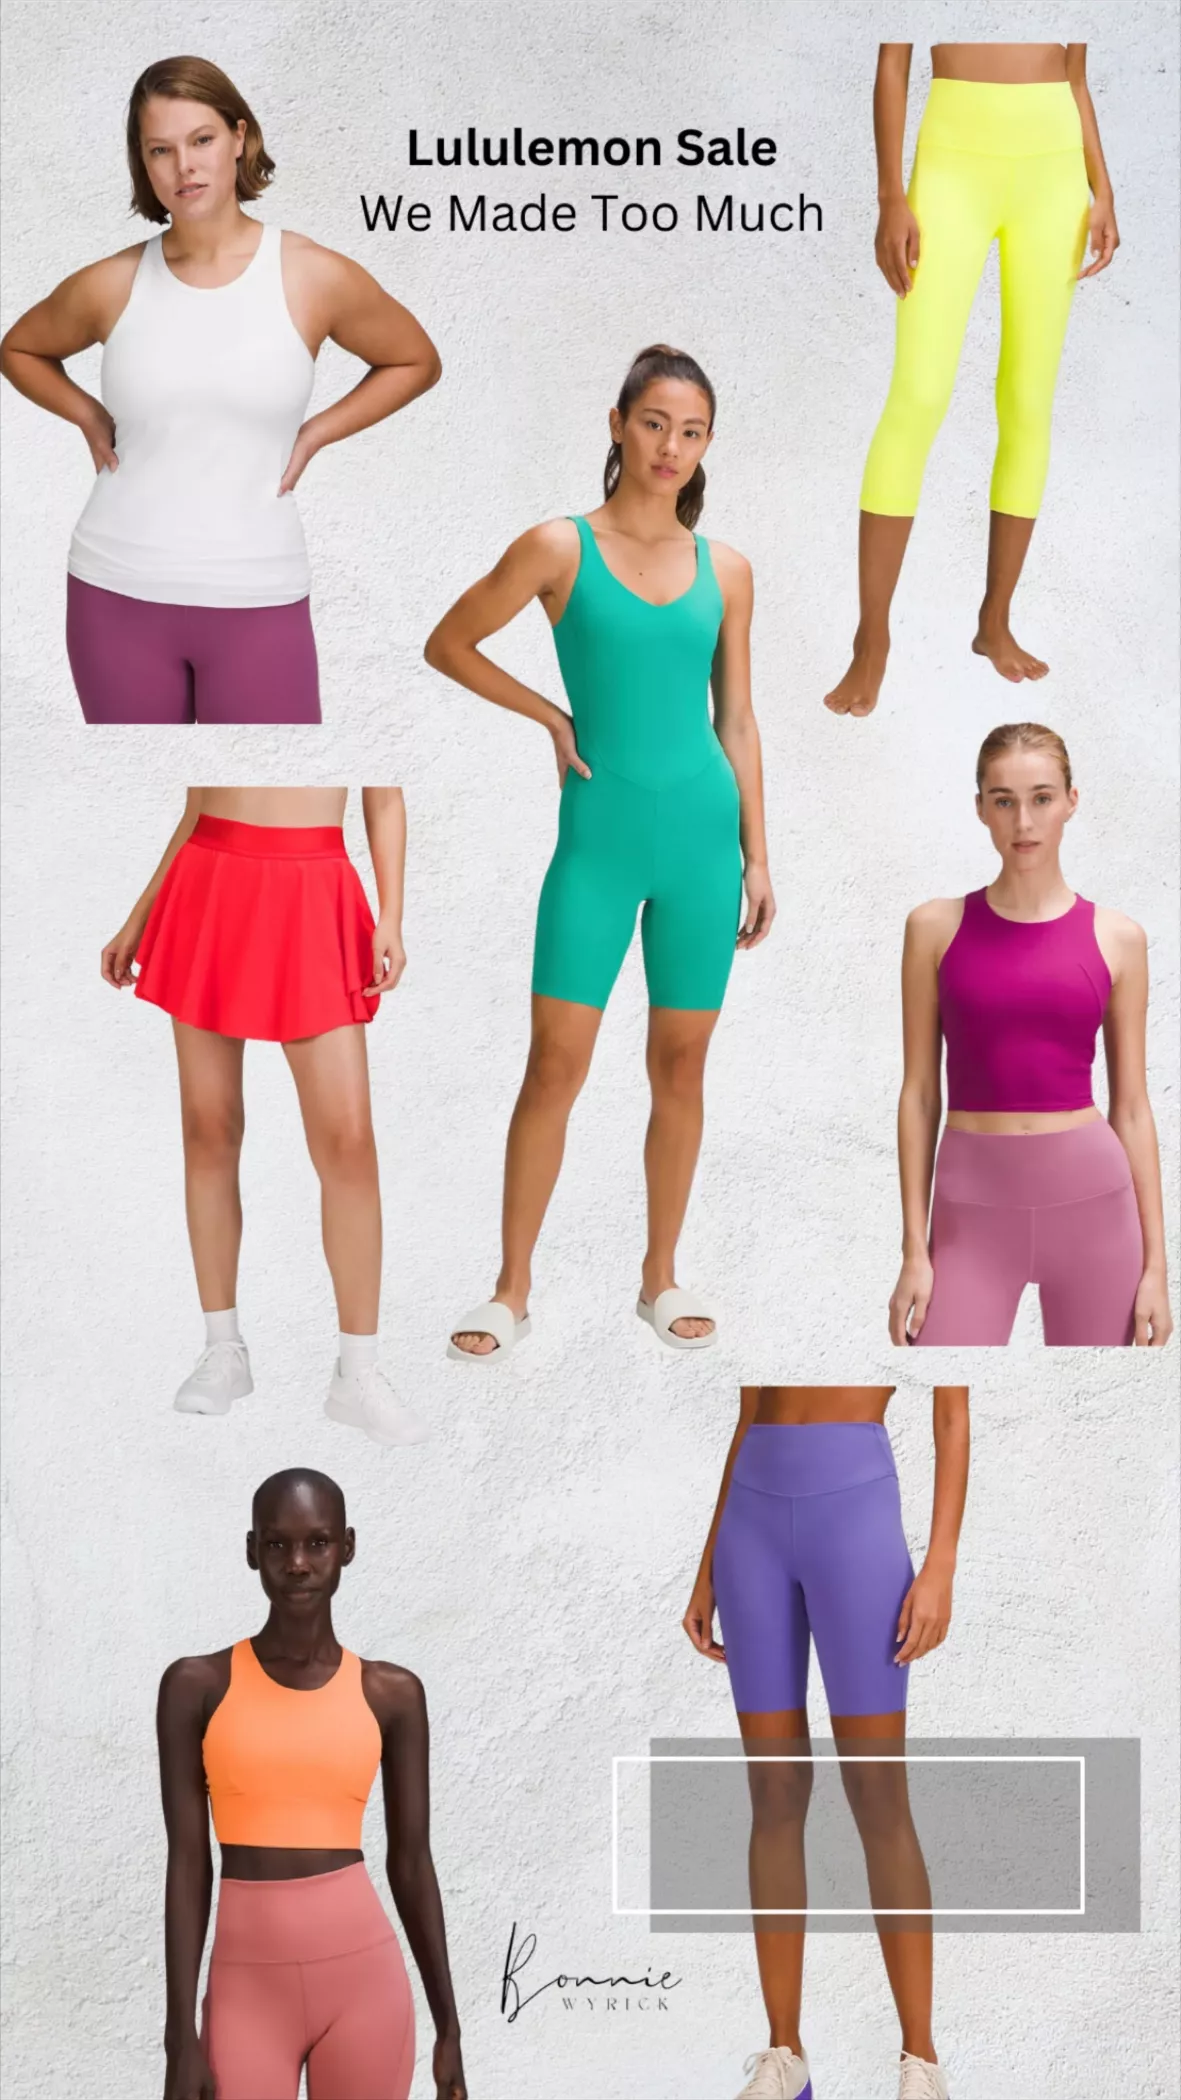 Lululemon's We Made Too Much section: Best deals on tanks and